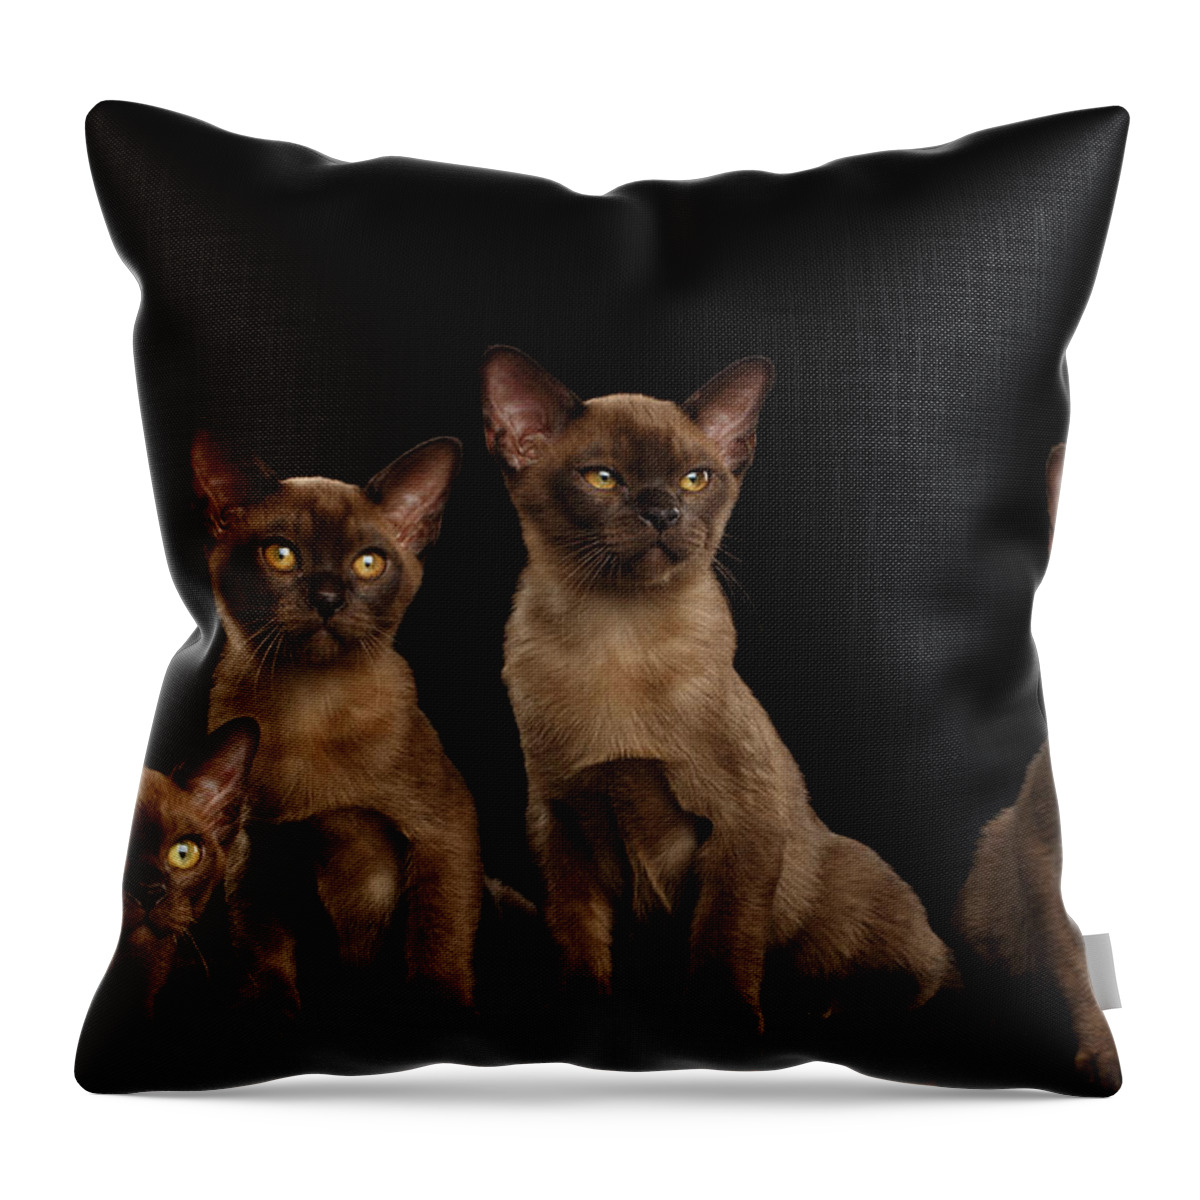 Cat Throw Pillow featuring the photograph Four Cute Burma Kittens Sitting, Isolated Black Background by Sergey Taran